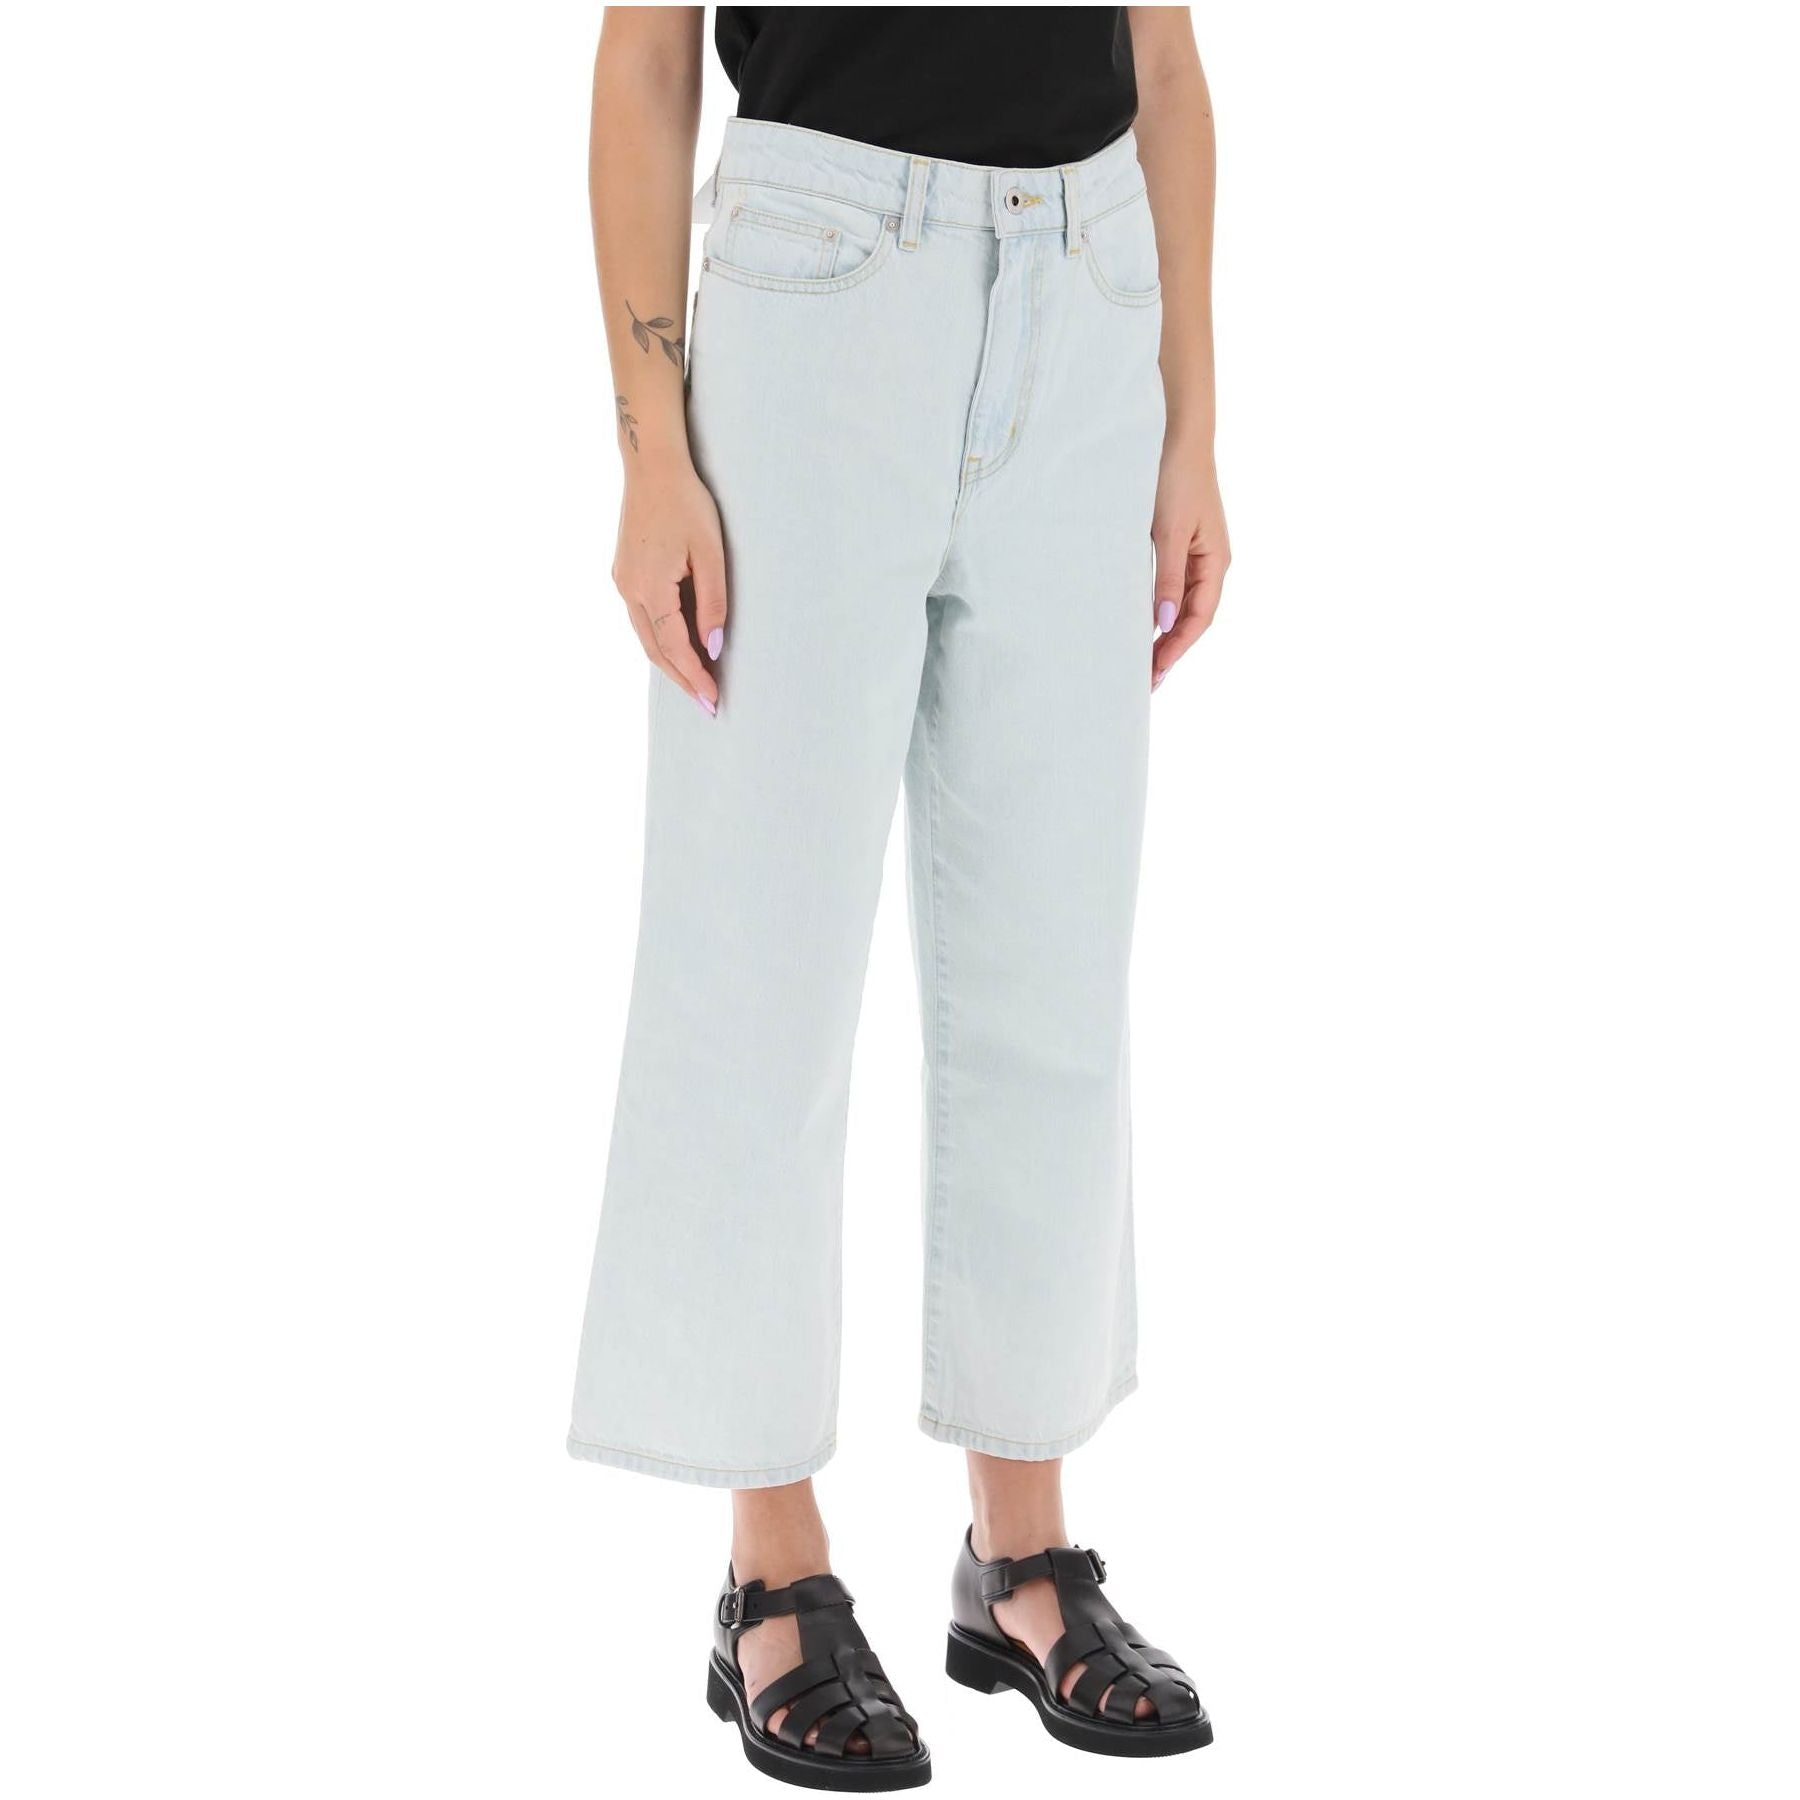 Japanese Denim 'Sumire' Cropped Jeans